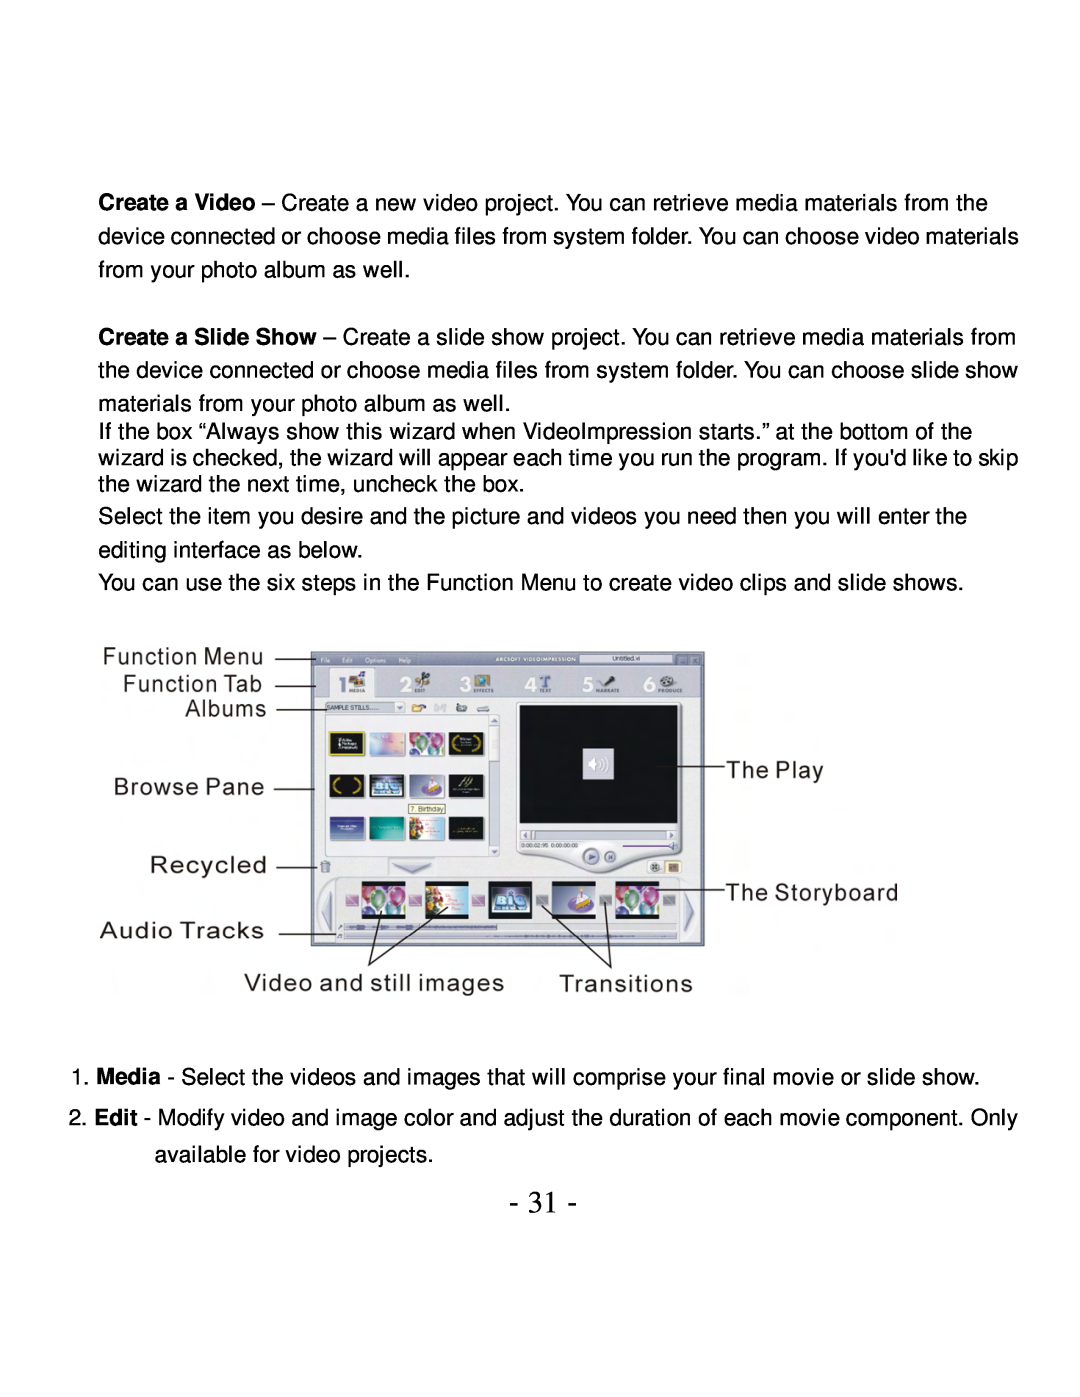 VistaQuest VQ5015 user manual materials from your photo album as well 